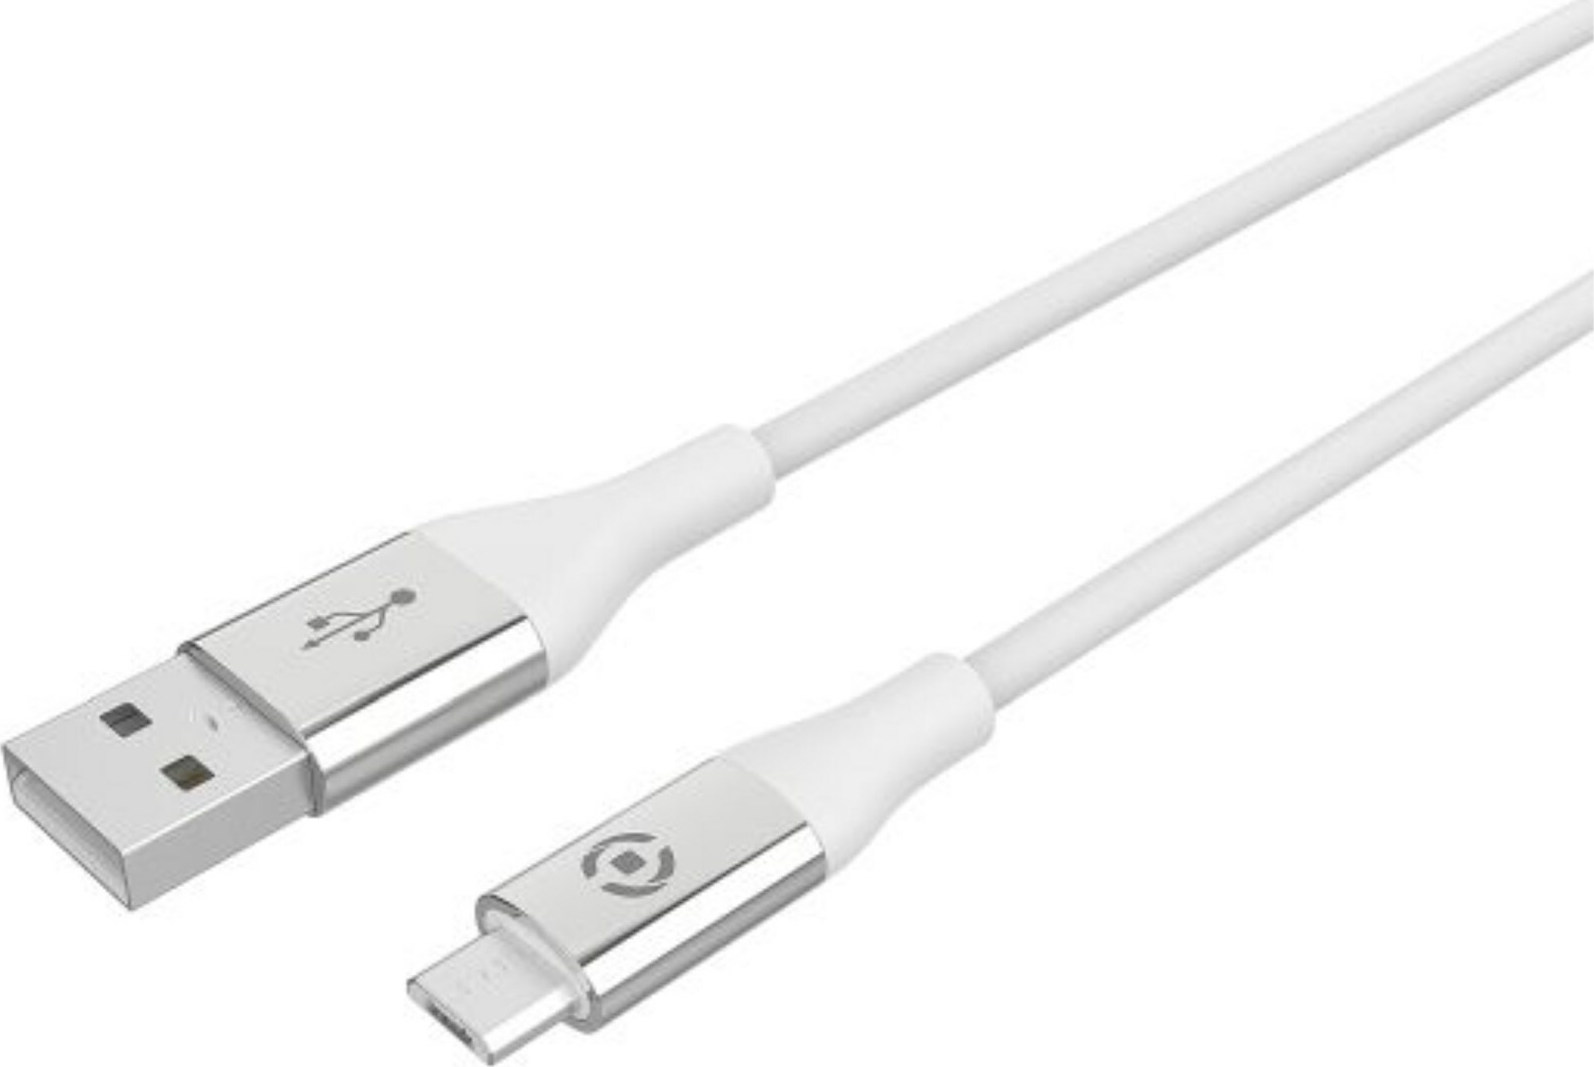 Celly Color Data Cable Extra Strong Micro Usb 1.5m White